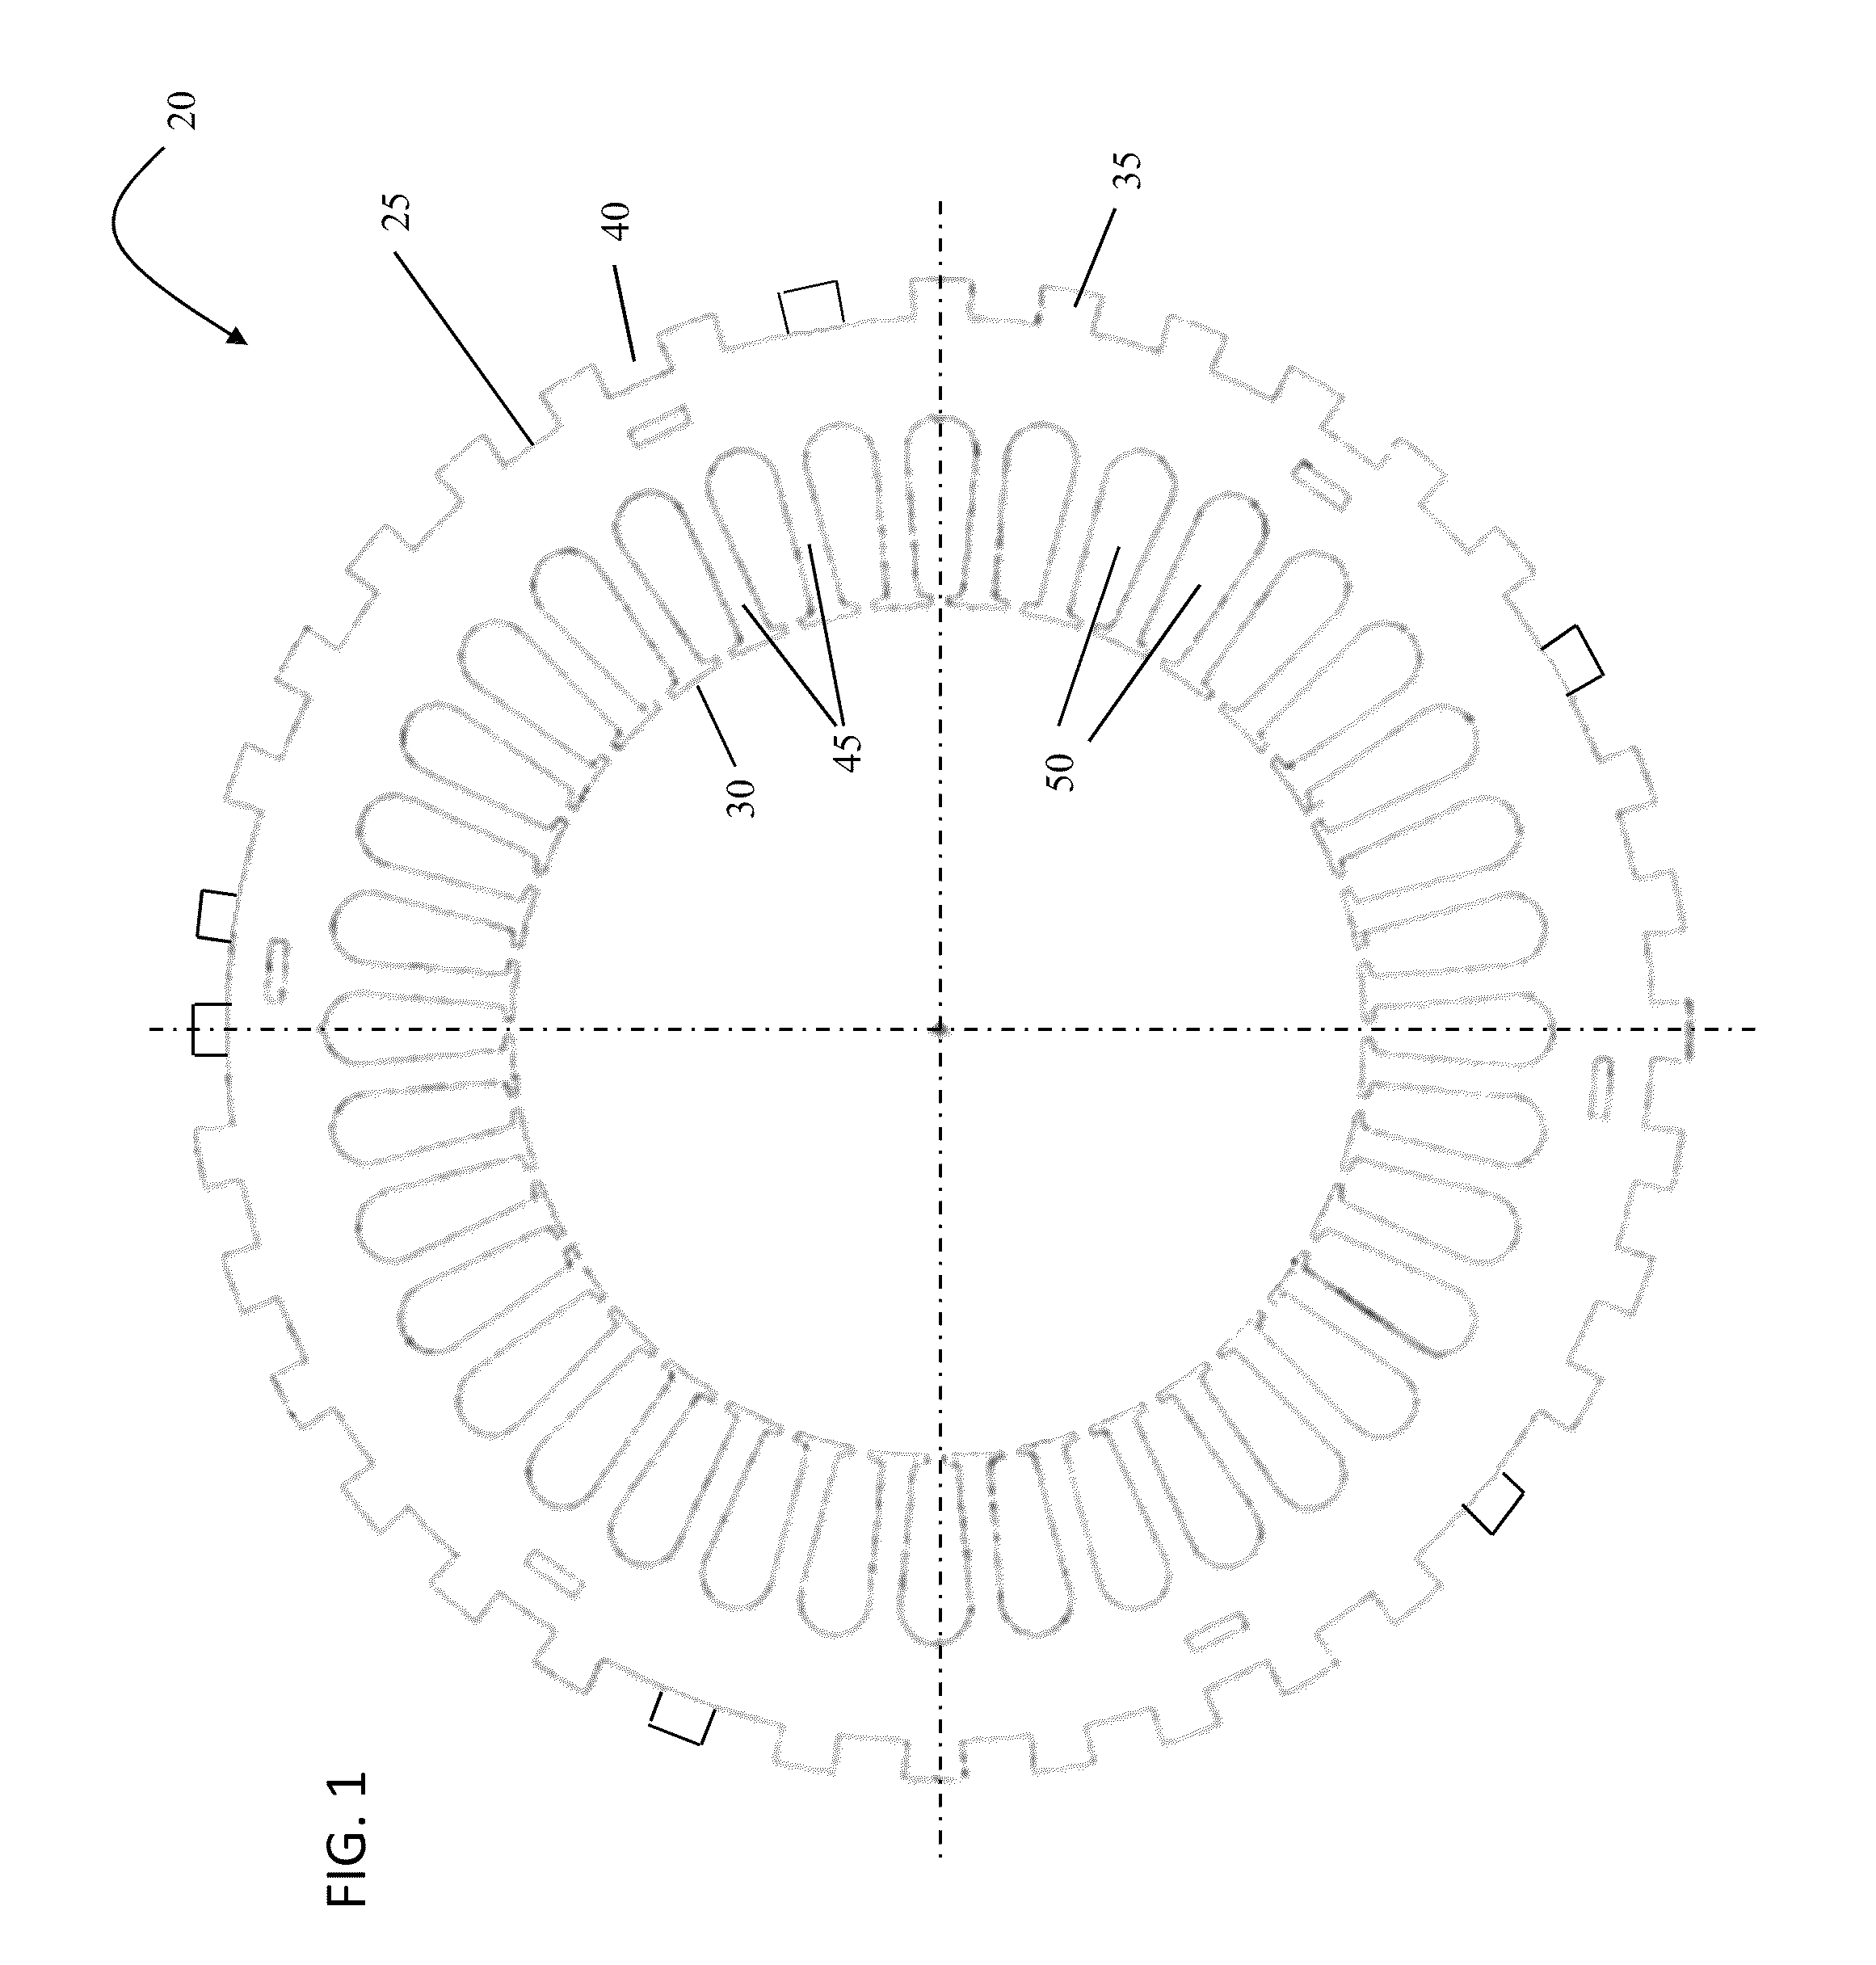 Stator cooling channel tolerant to localized blockage